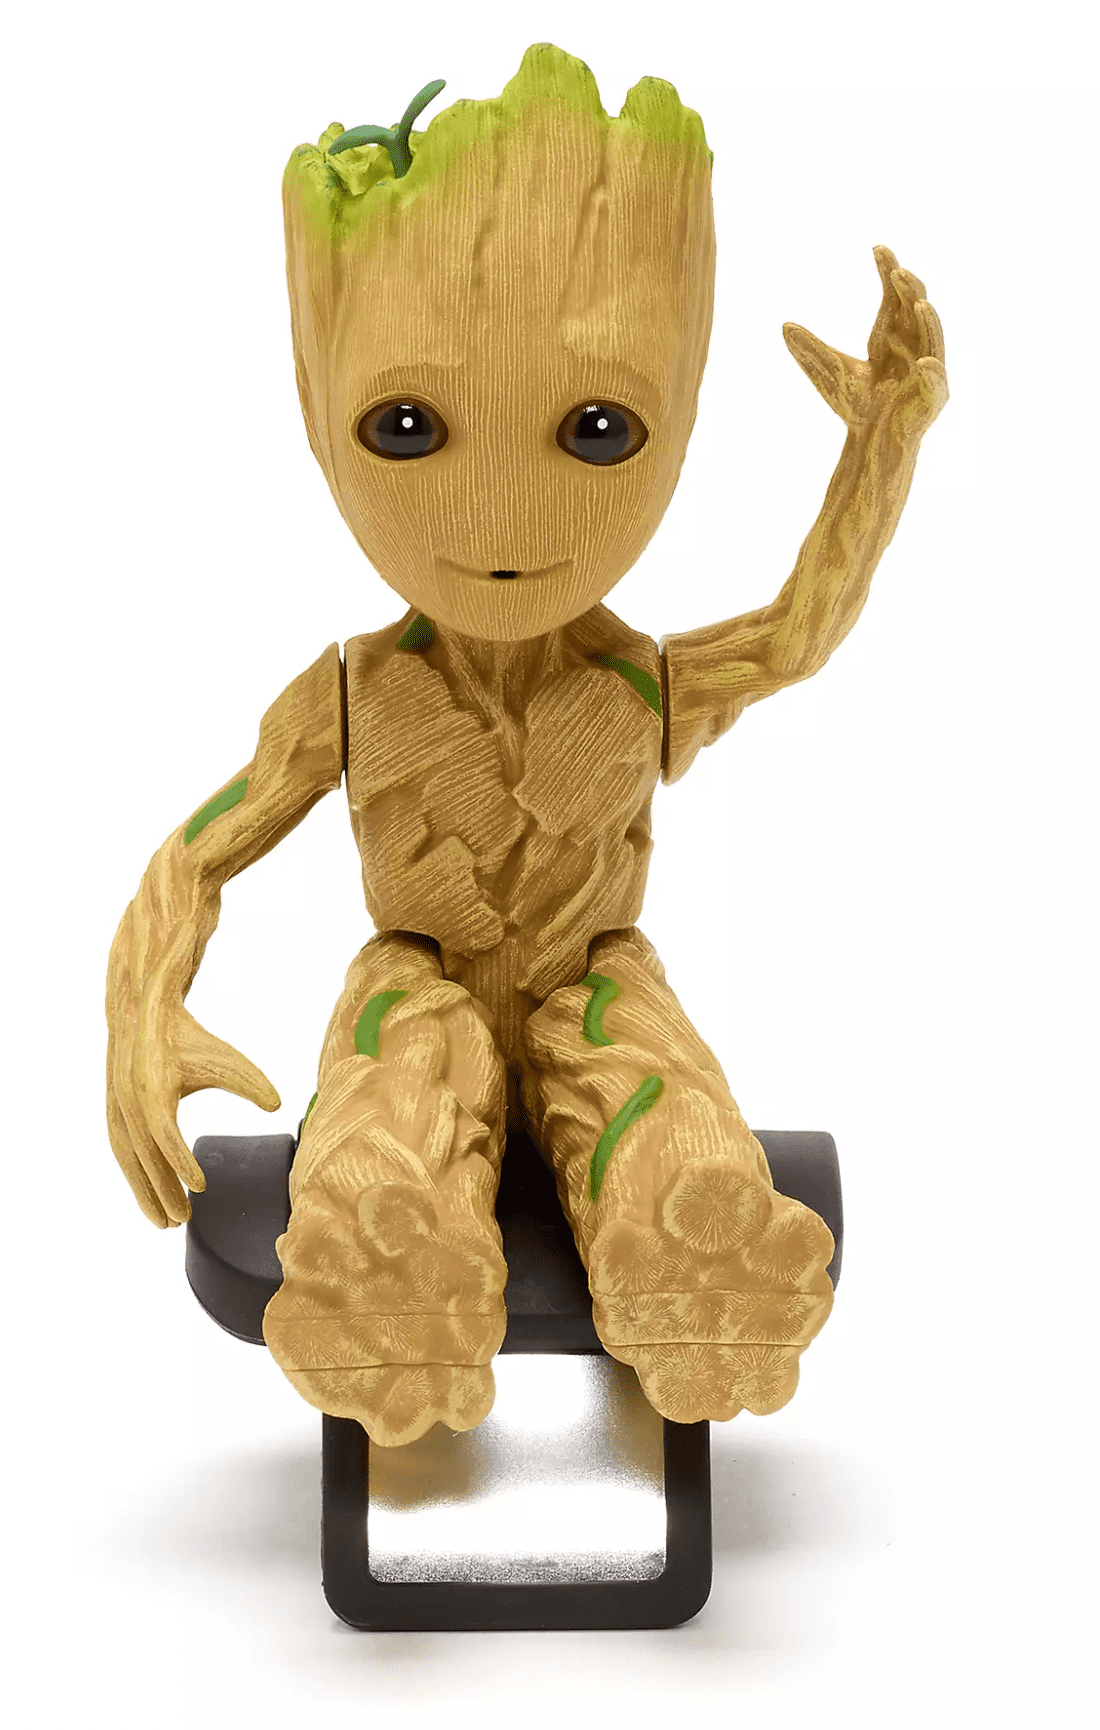 Life-Size Groot (Baby, 10-Inch, Guardians of the Galaxy) 202 - Target  Exclusive [Condition: 6/10]